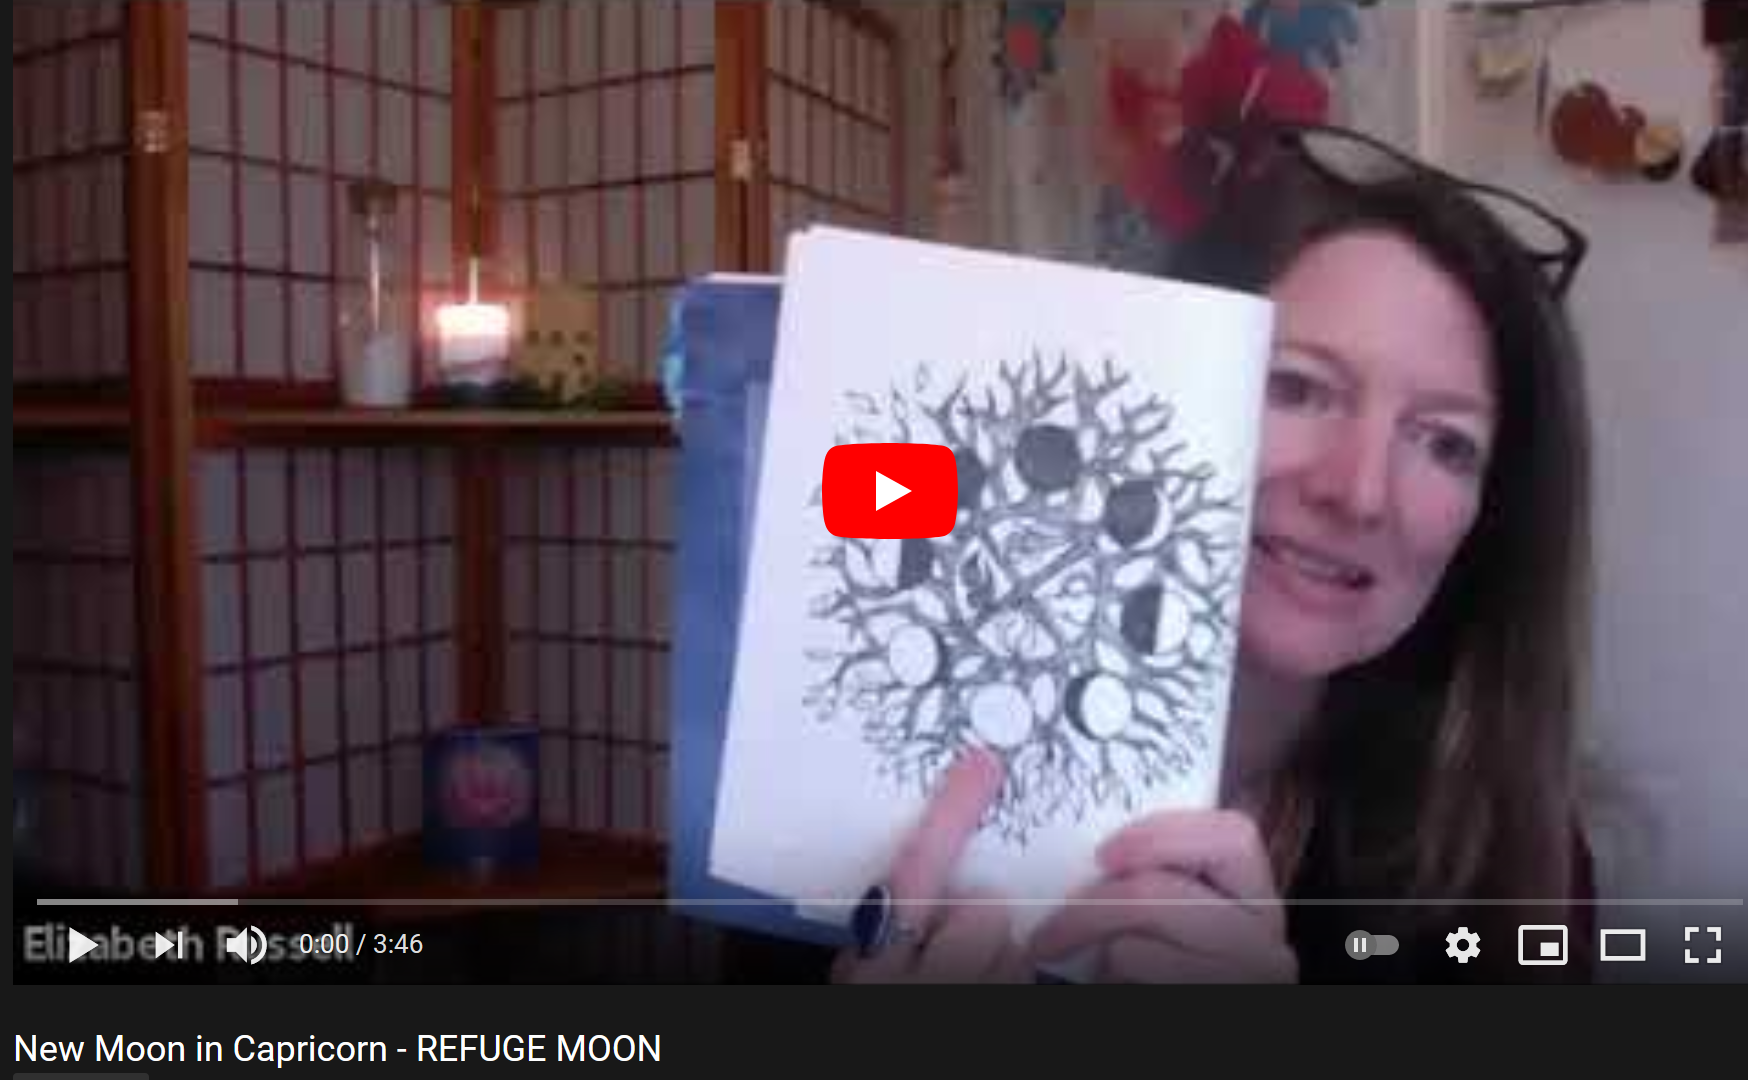 Refuge Moon: Dwell in the Silence